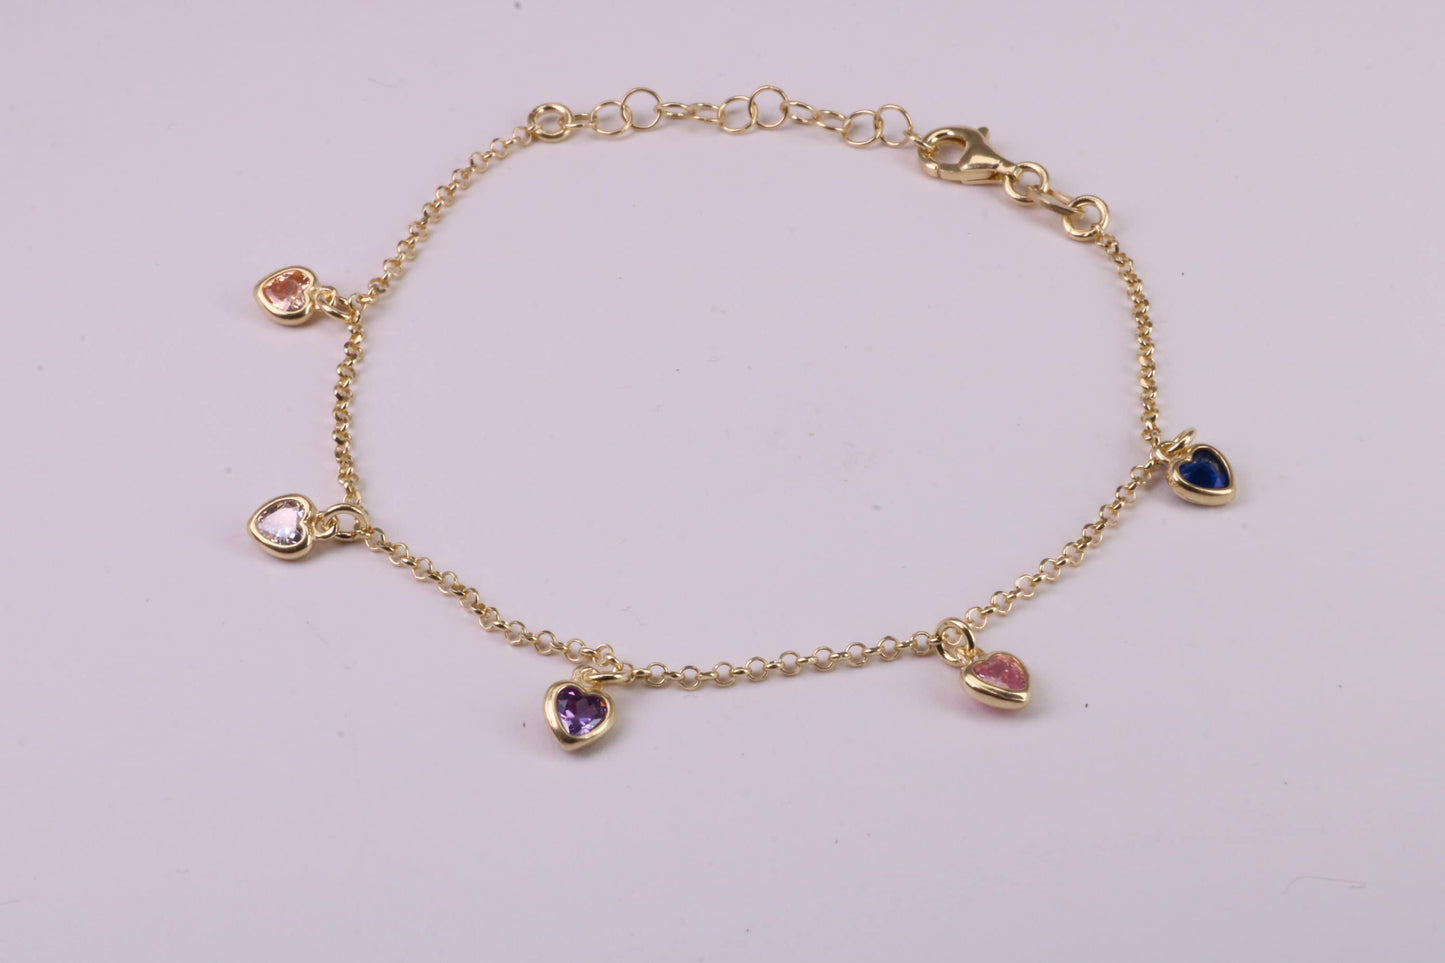 Rainbow Dainty Love Hearts Bracelet, With Length Adjustable Chain, Made from solid Sterling Silver and Further 18ct Yellow Gold Plated